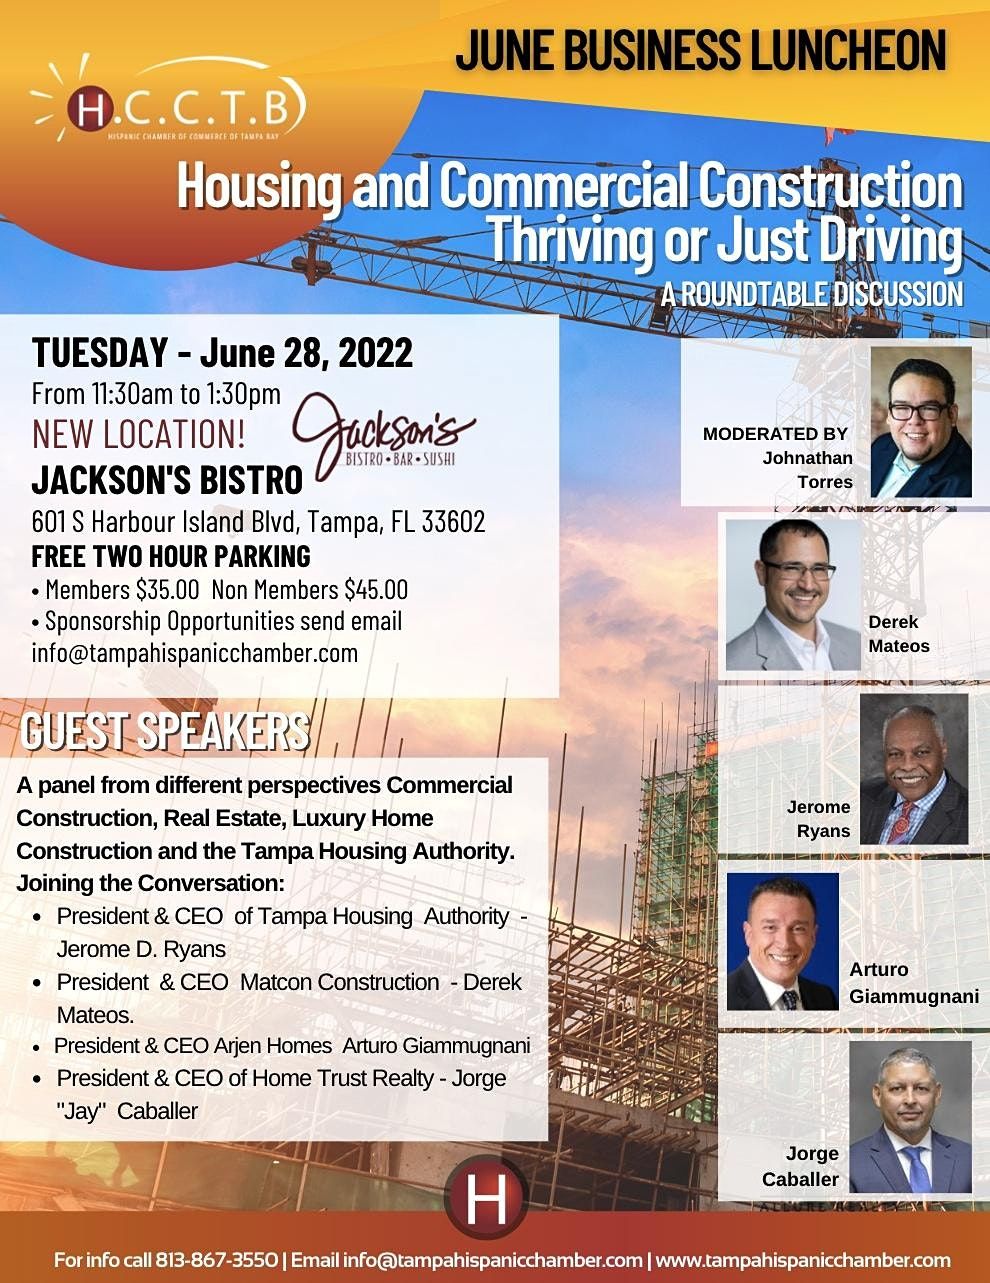 Housing & Commercial Construction - HCCTB  June 28, 2022  Business Luncheon